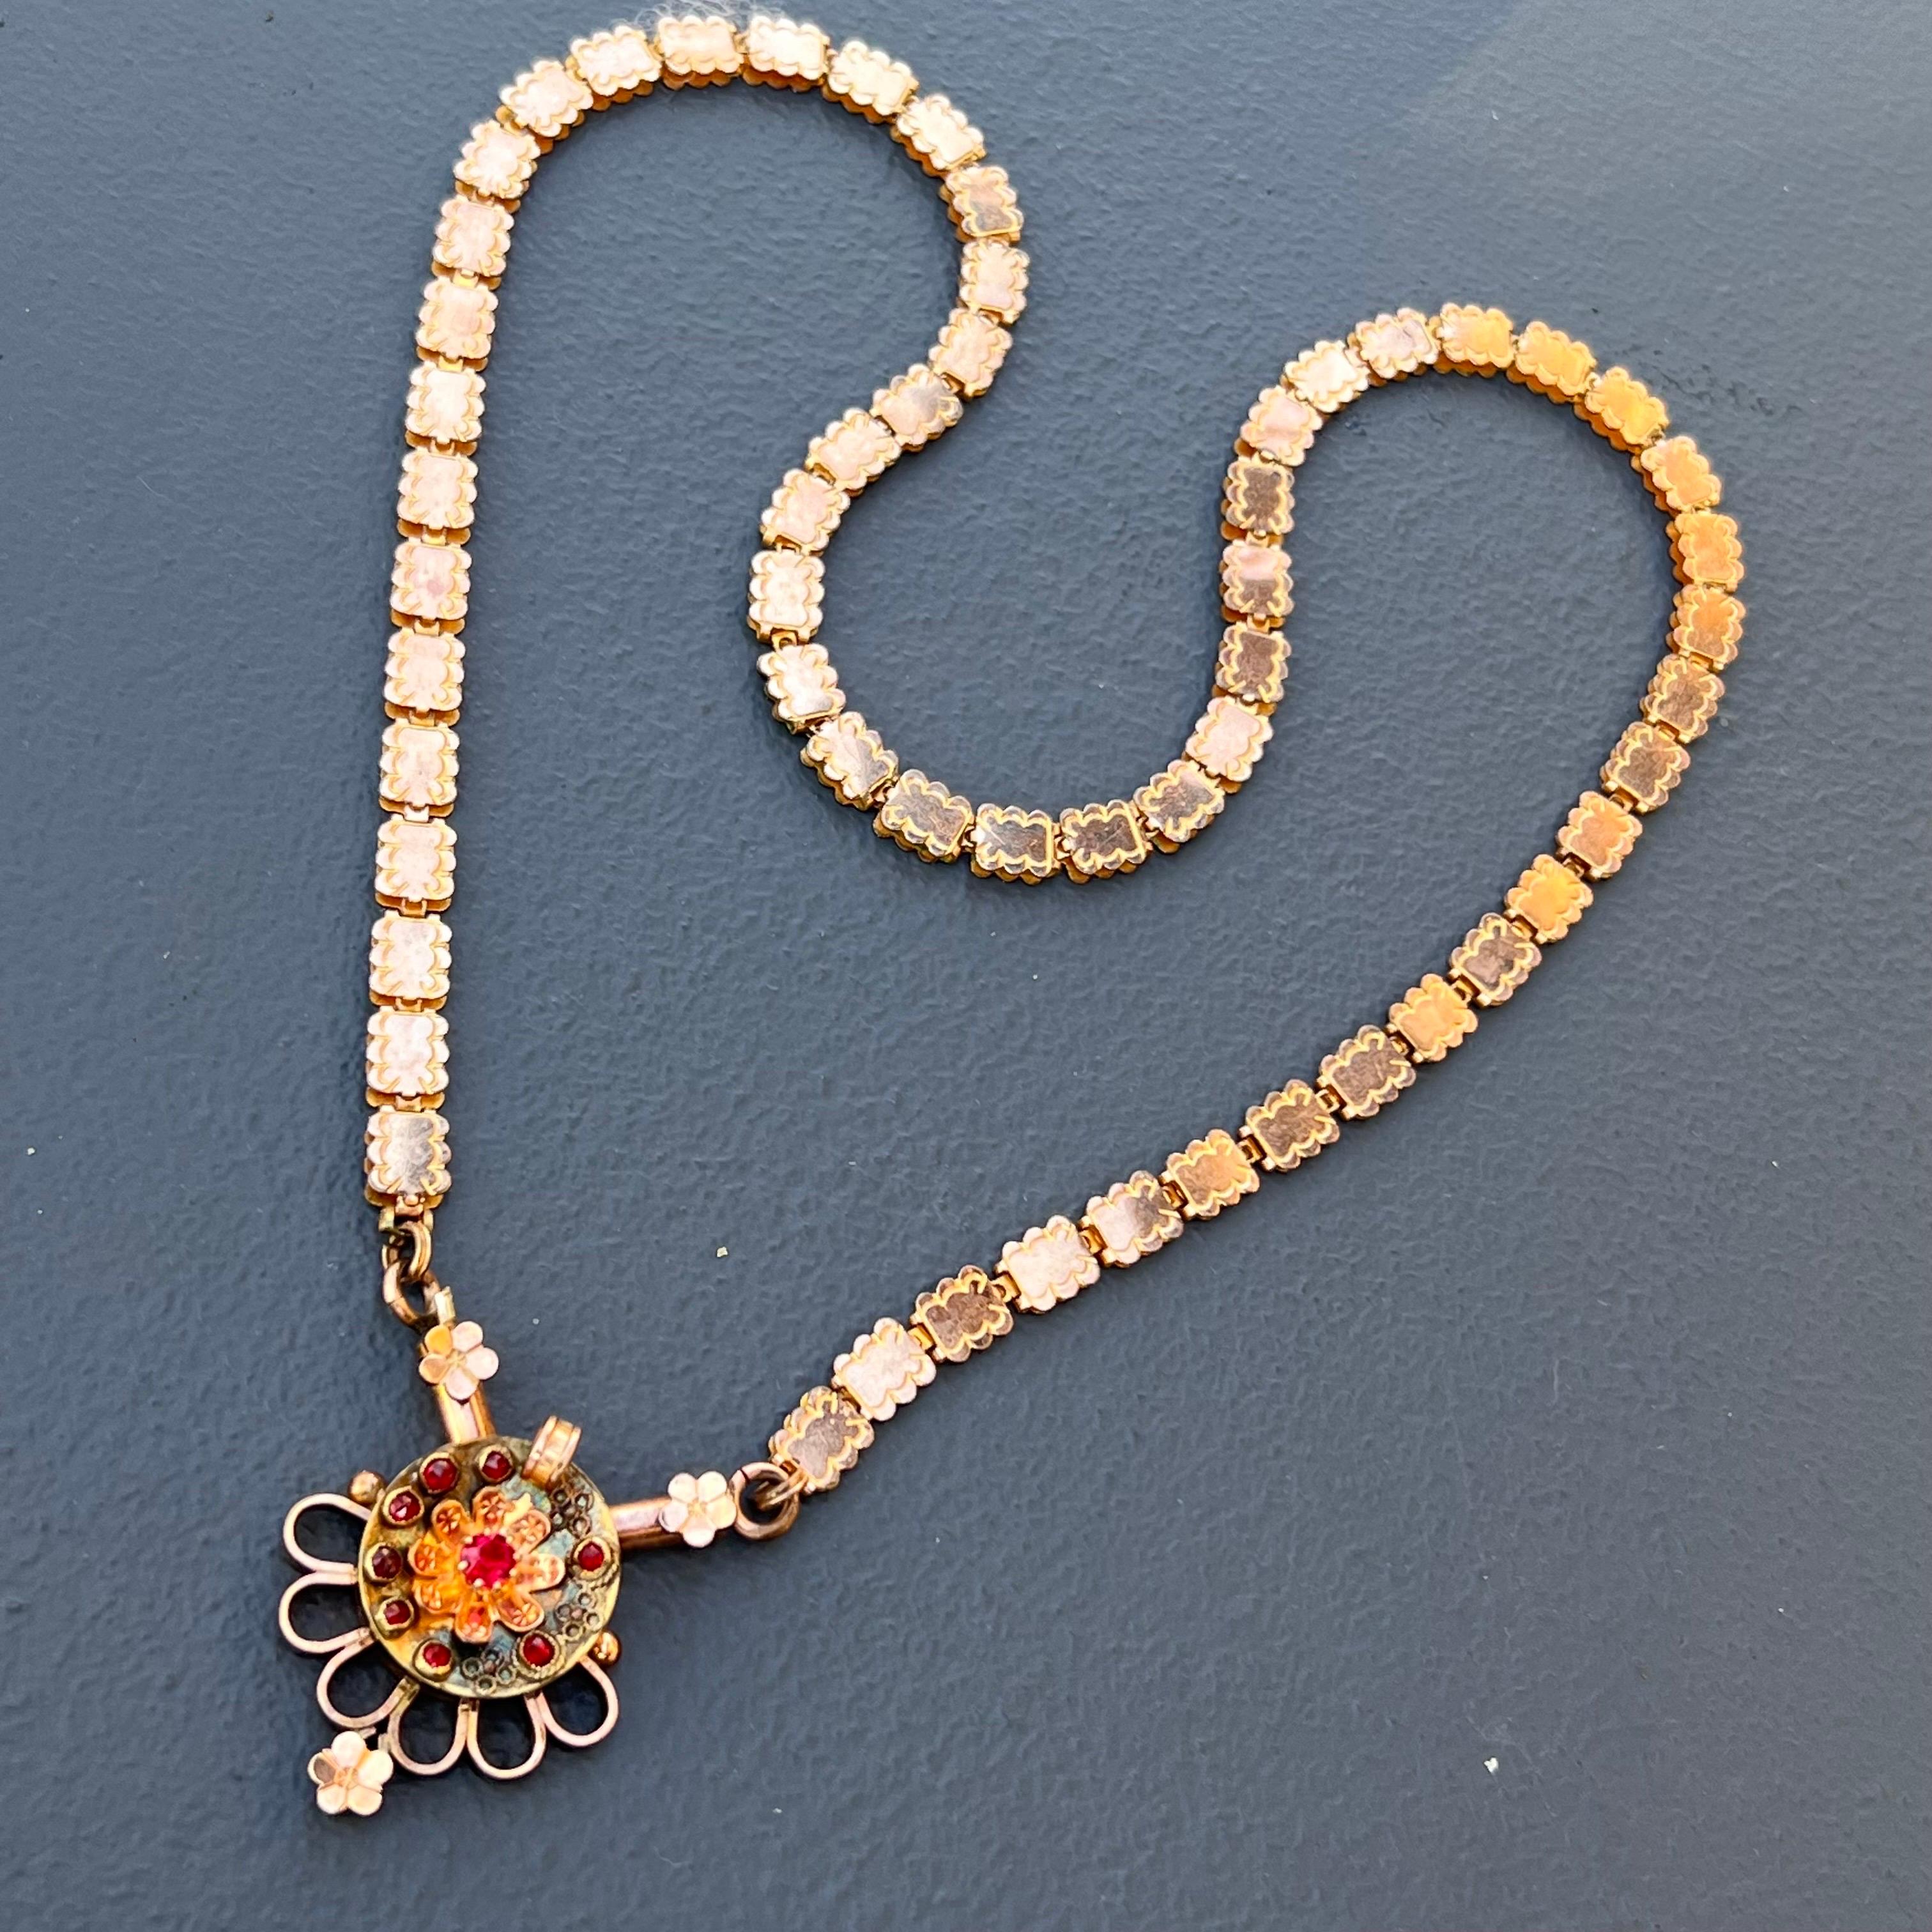 Antique Victorian Rose Gold Filled Book Chain Necklace For Sale 1